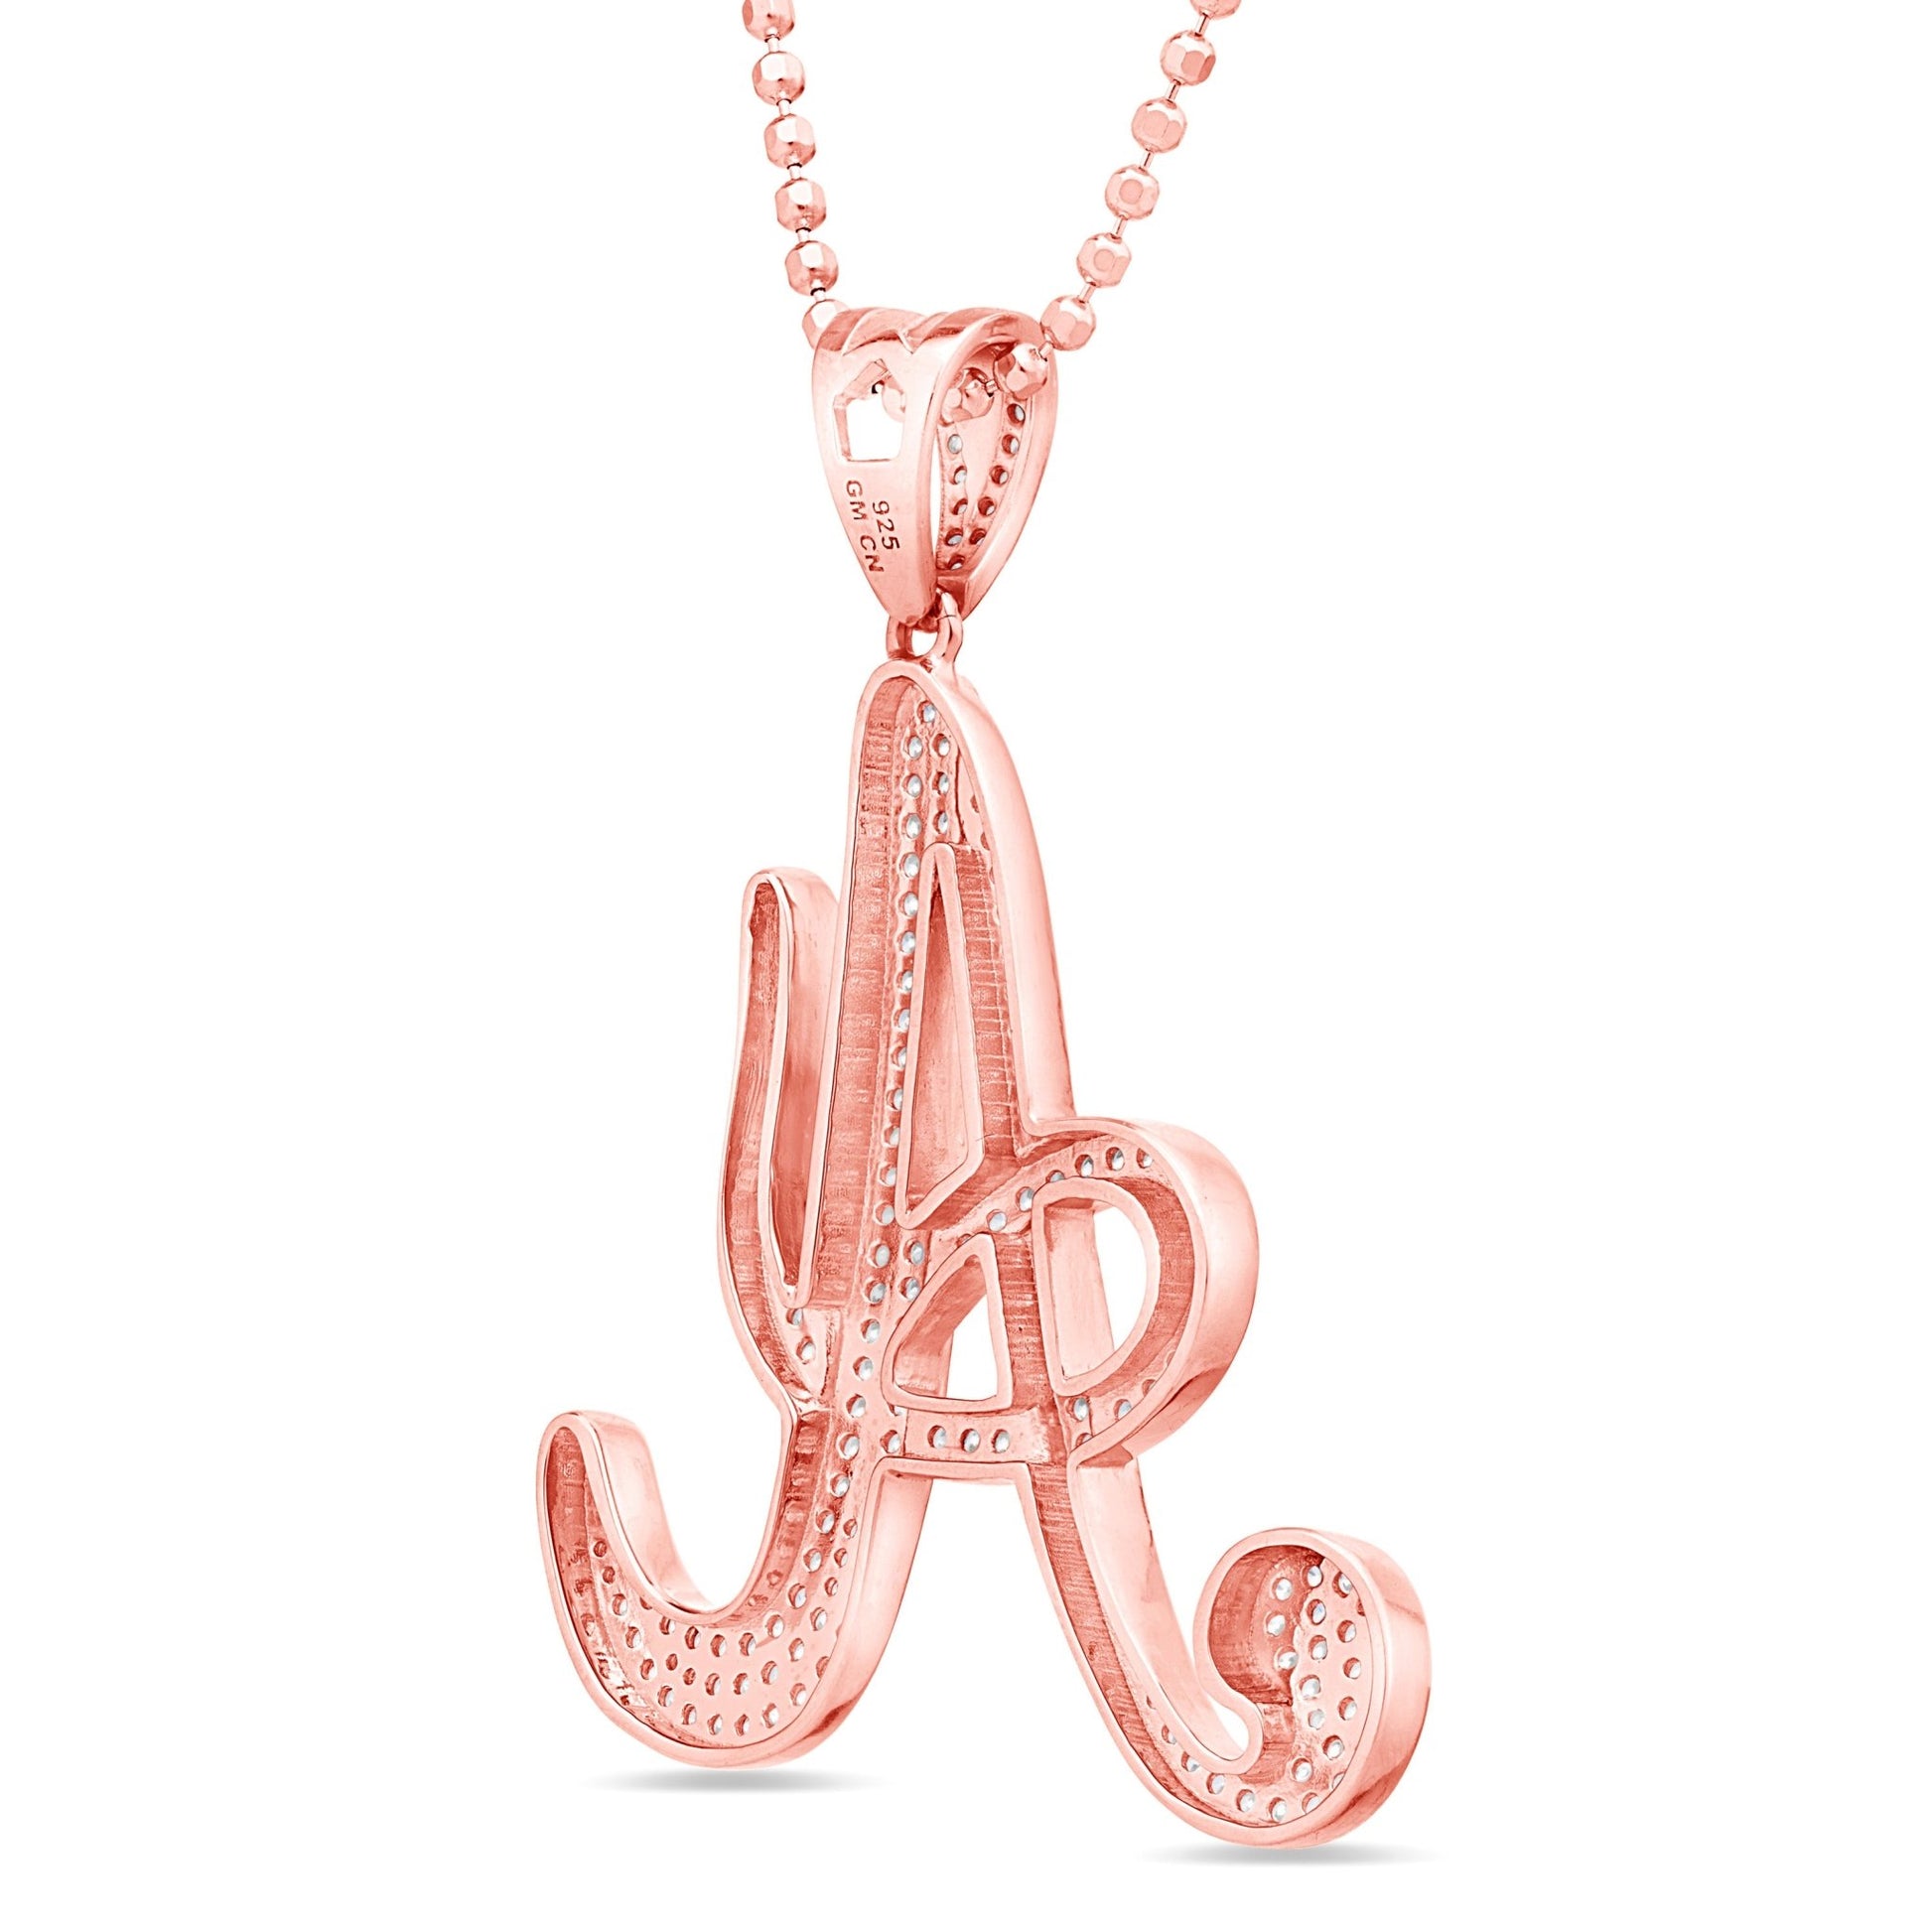 V Silver Initial Pendant Necklace